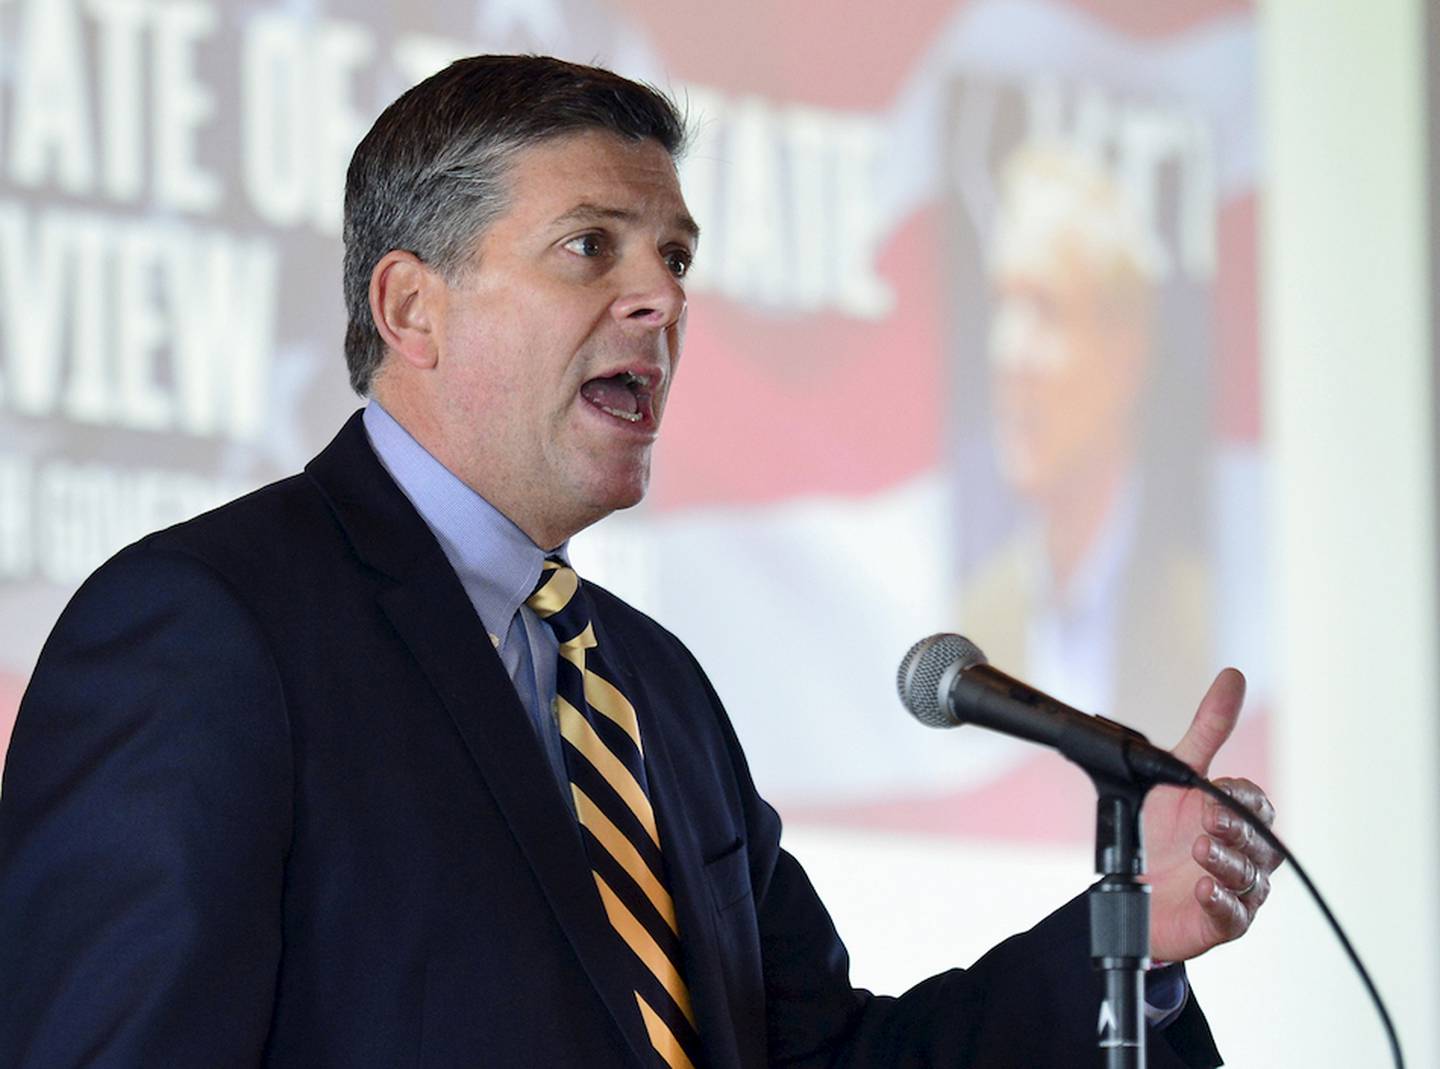 FILE - In this Feb. 6, 2015 file photo, Illinois state Sen. Darin LaHood, R-Dunlap, is seen at a Chamber of Commerce event in Peoria, Ill. LaHood, the son of former White House cabinet member and longtime Peoria U.S. Rep. Ray LaHood, remains the overwhelming favorite as the field takes shape for the race to replace ex-U.S. Rep. Aaron Schock. (AP Photo/Journal Star, Fred Zwicky, File)